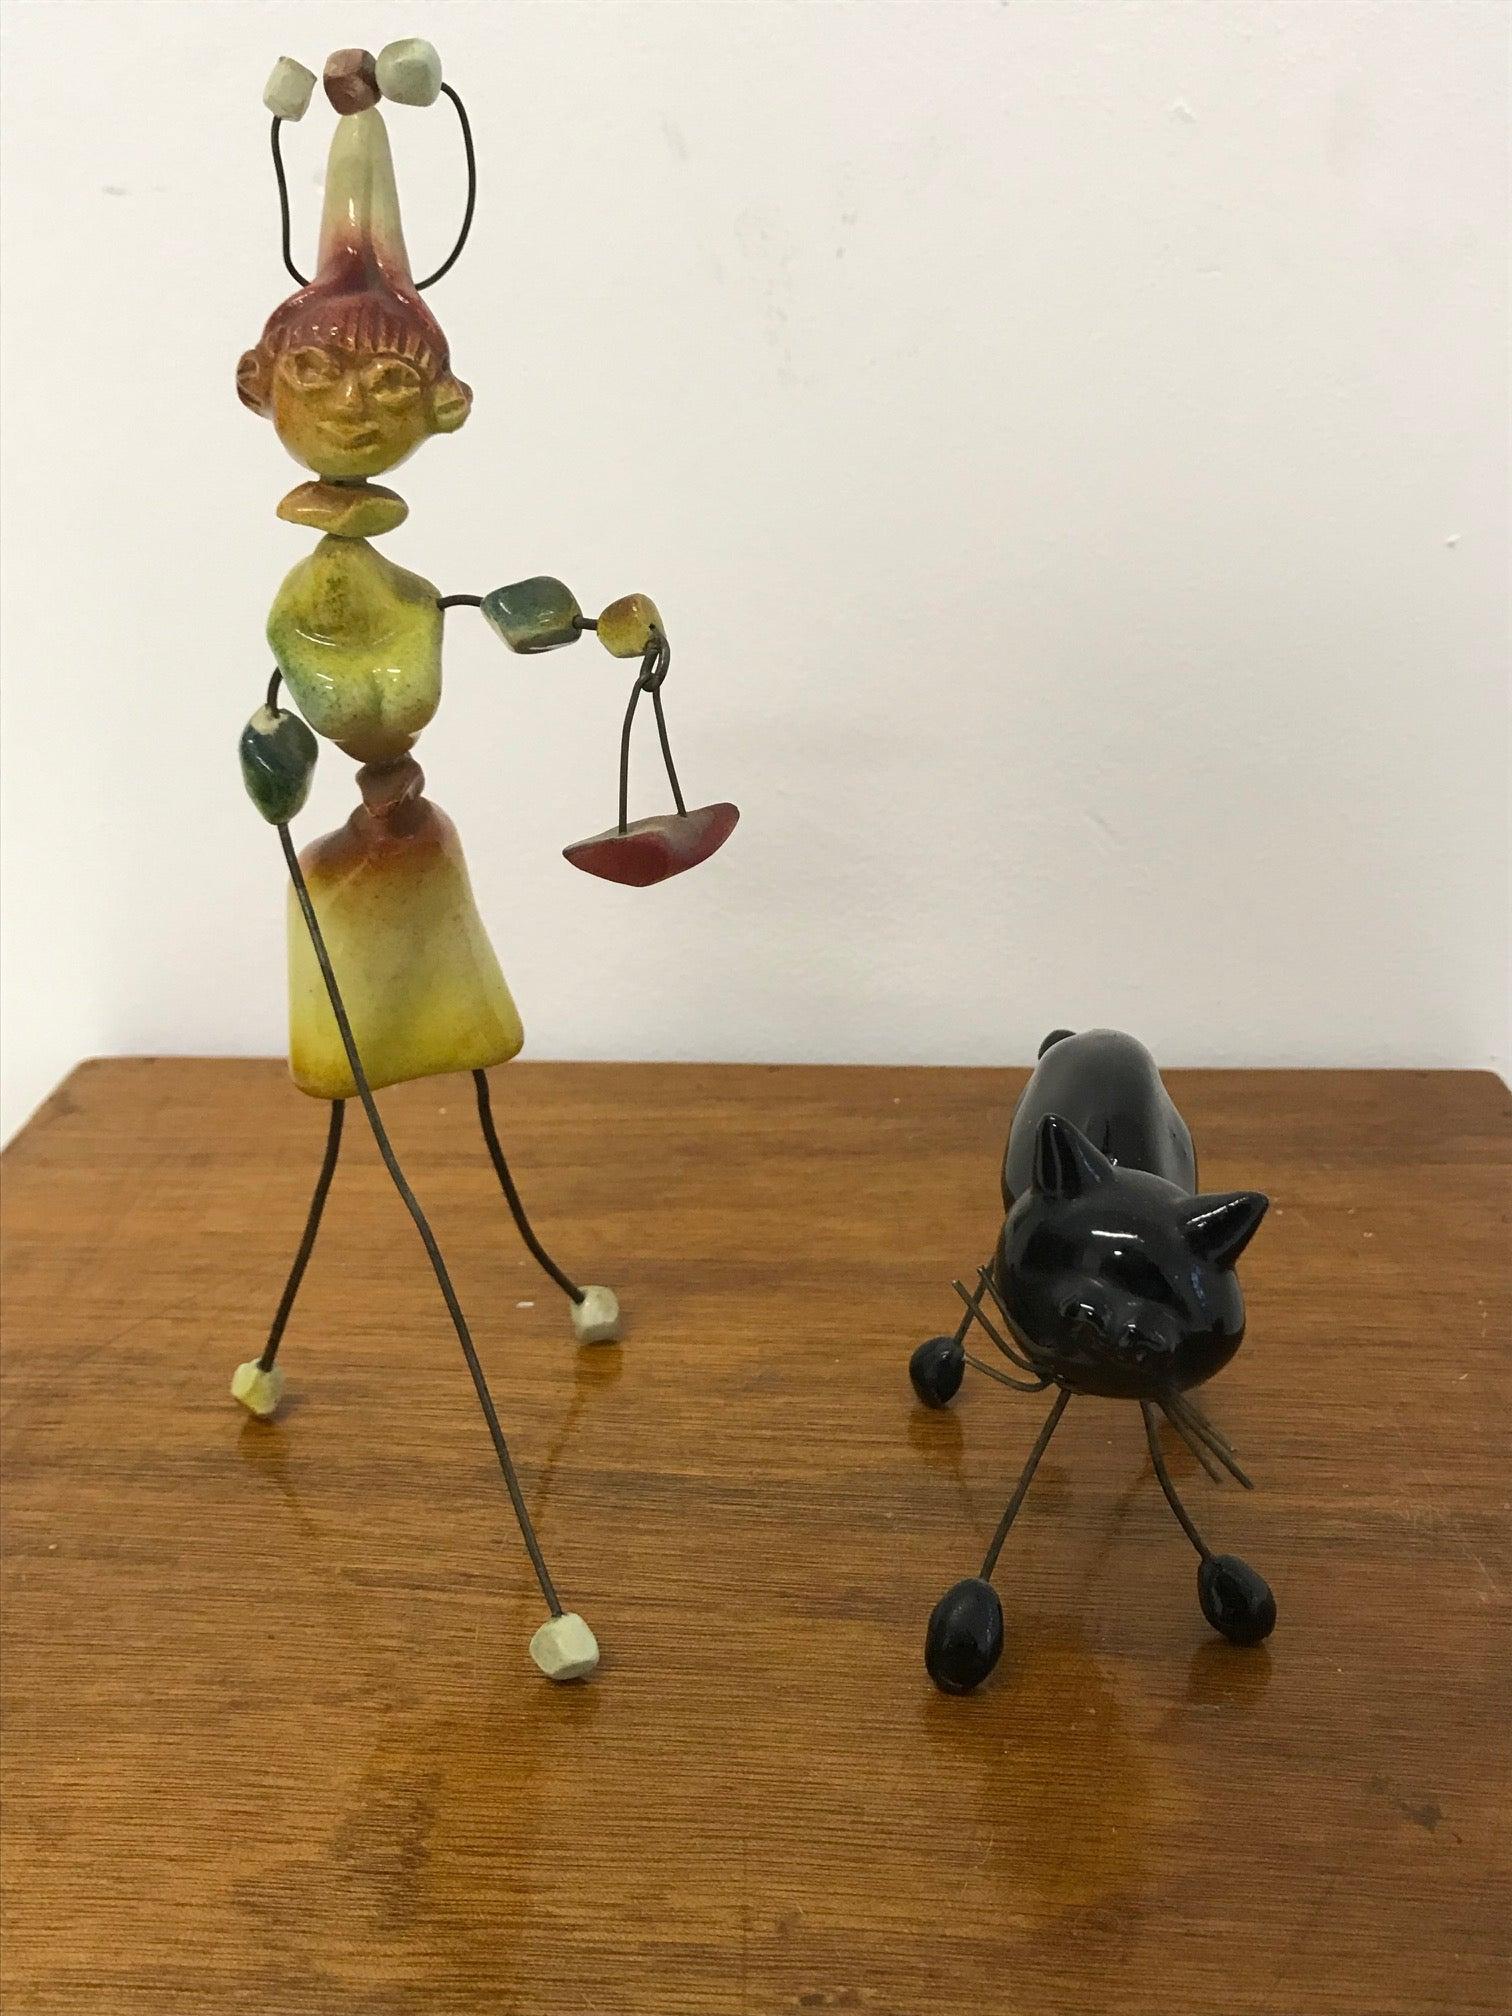 Manufacture Accolay, rare small ceramic sculpture assembled using metal wires.
Measures: Height of the woman 22 cm, height of the cat 8.5 cm.